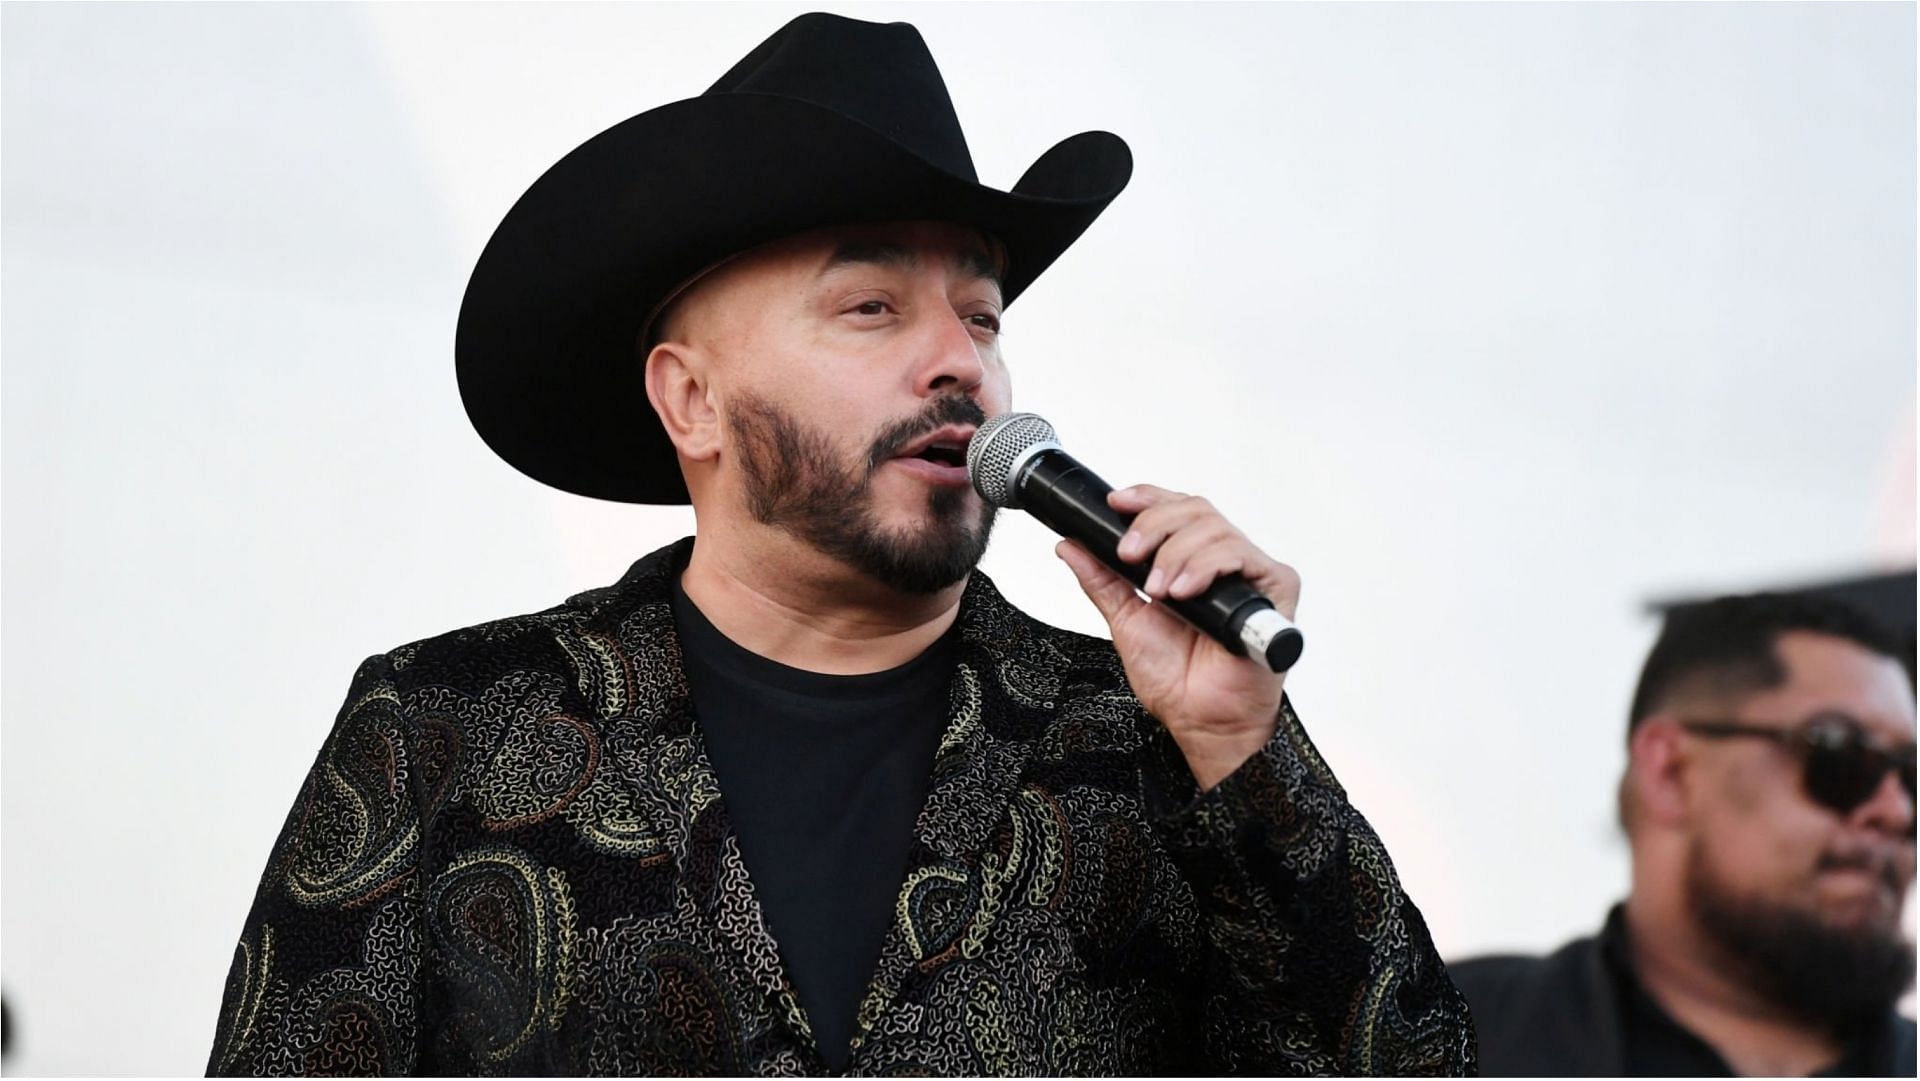 Lupillo Rivera apologized to his ex-wife and kids on social media (Image via JC Olivera/Getty Images)